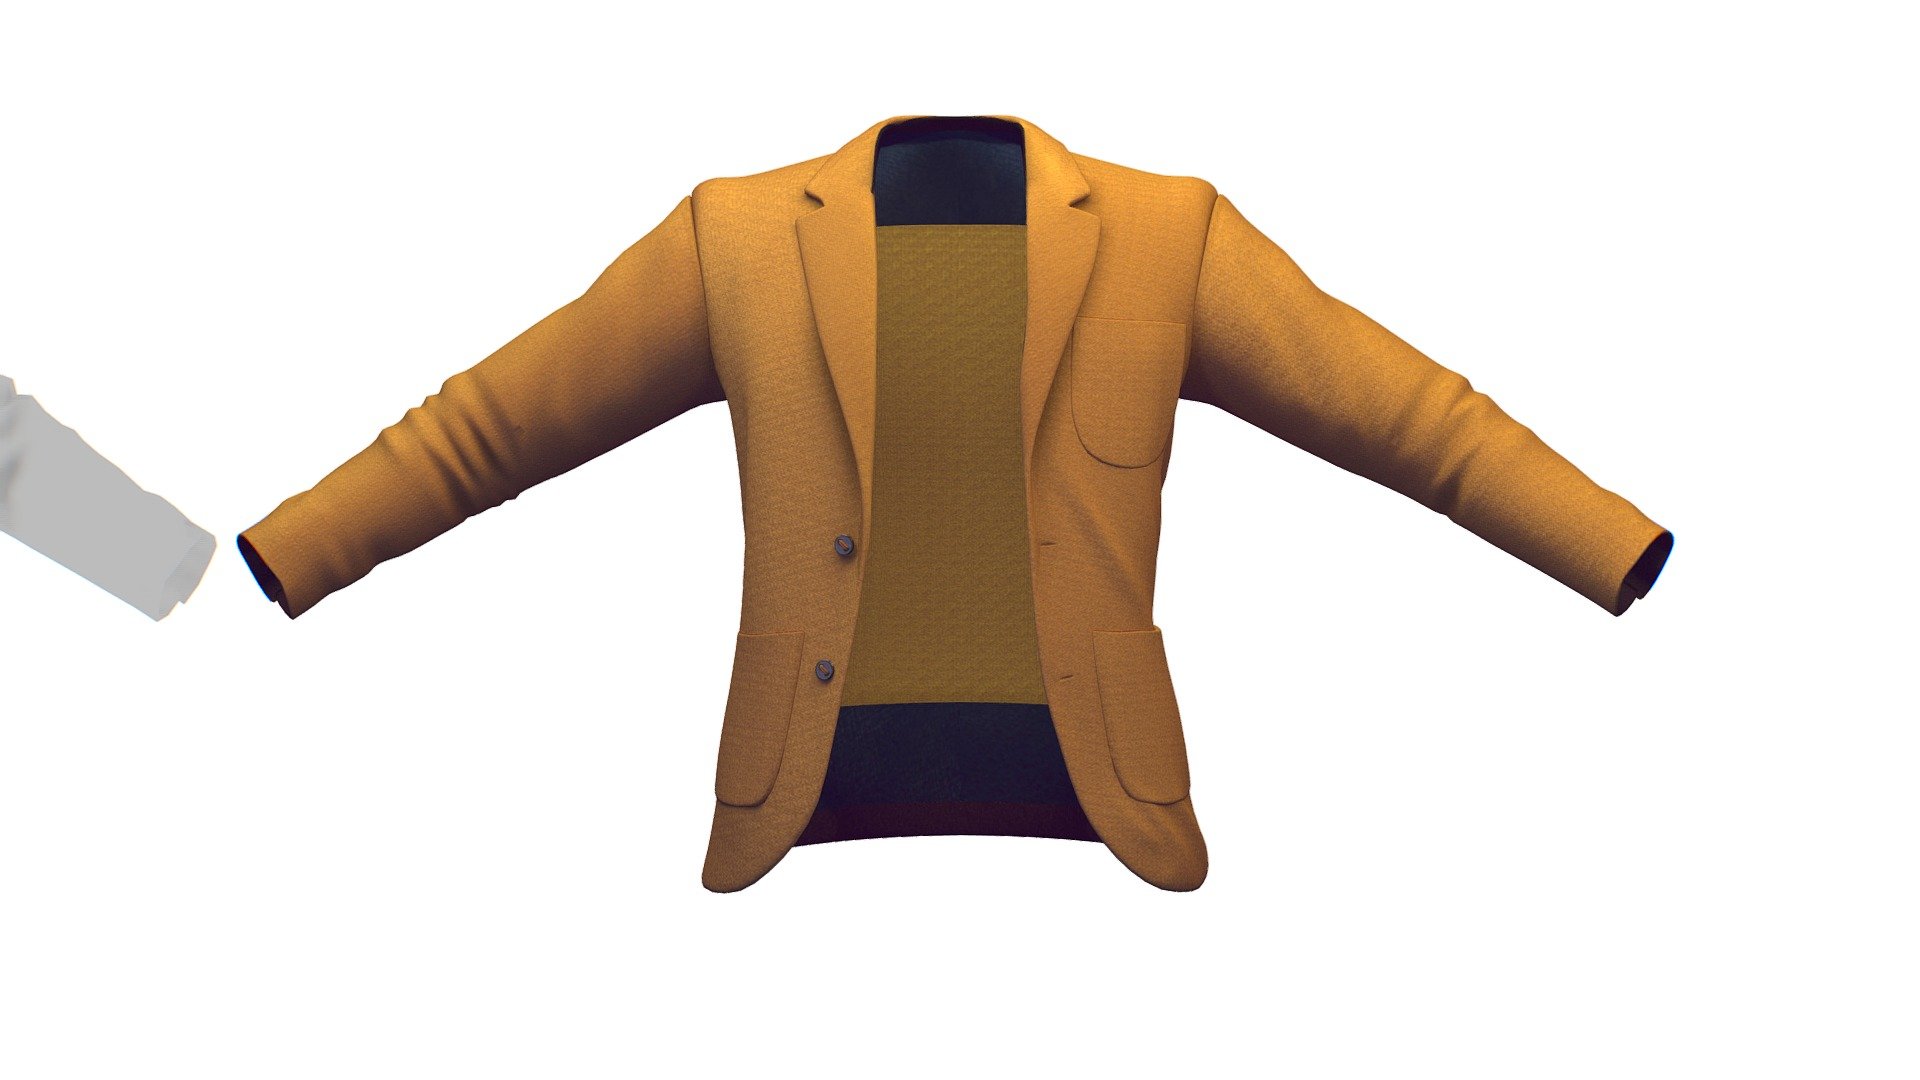 Cartoon High Poly Subdivision Sand Jacket

No HDRI map, No Light, No material settings - only Diffuse/Color Map Texture (2500x2500)

More information about the 3D model: please use the Sketchfab Model Inspector - Key (i) - Cartoon High Poly Subdivision Sand Jacket - Buy Royalty Free 3D model by Oleg Shuldiakov (@olegshuldiakov) 3d model